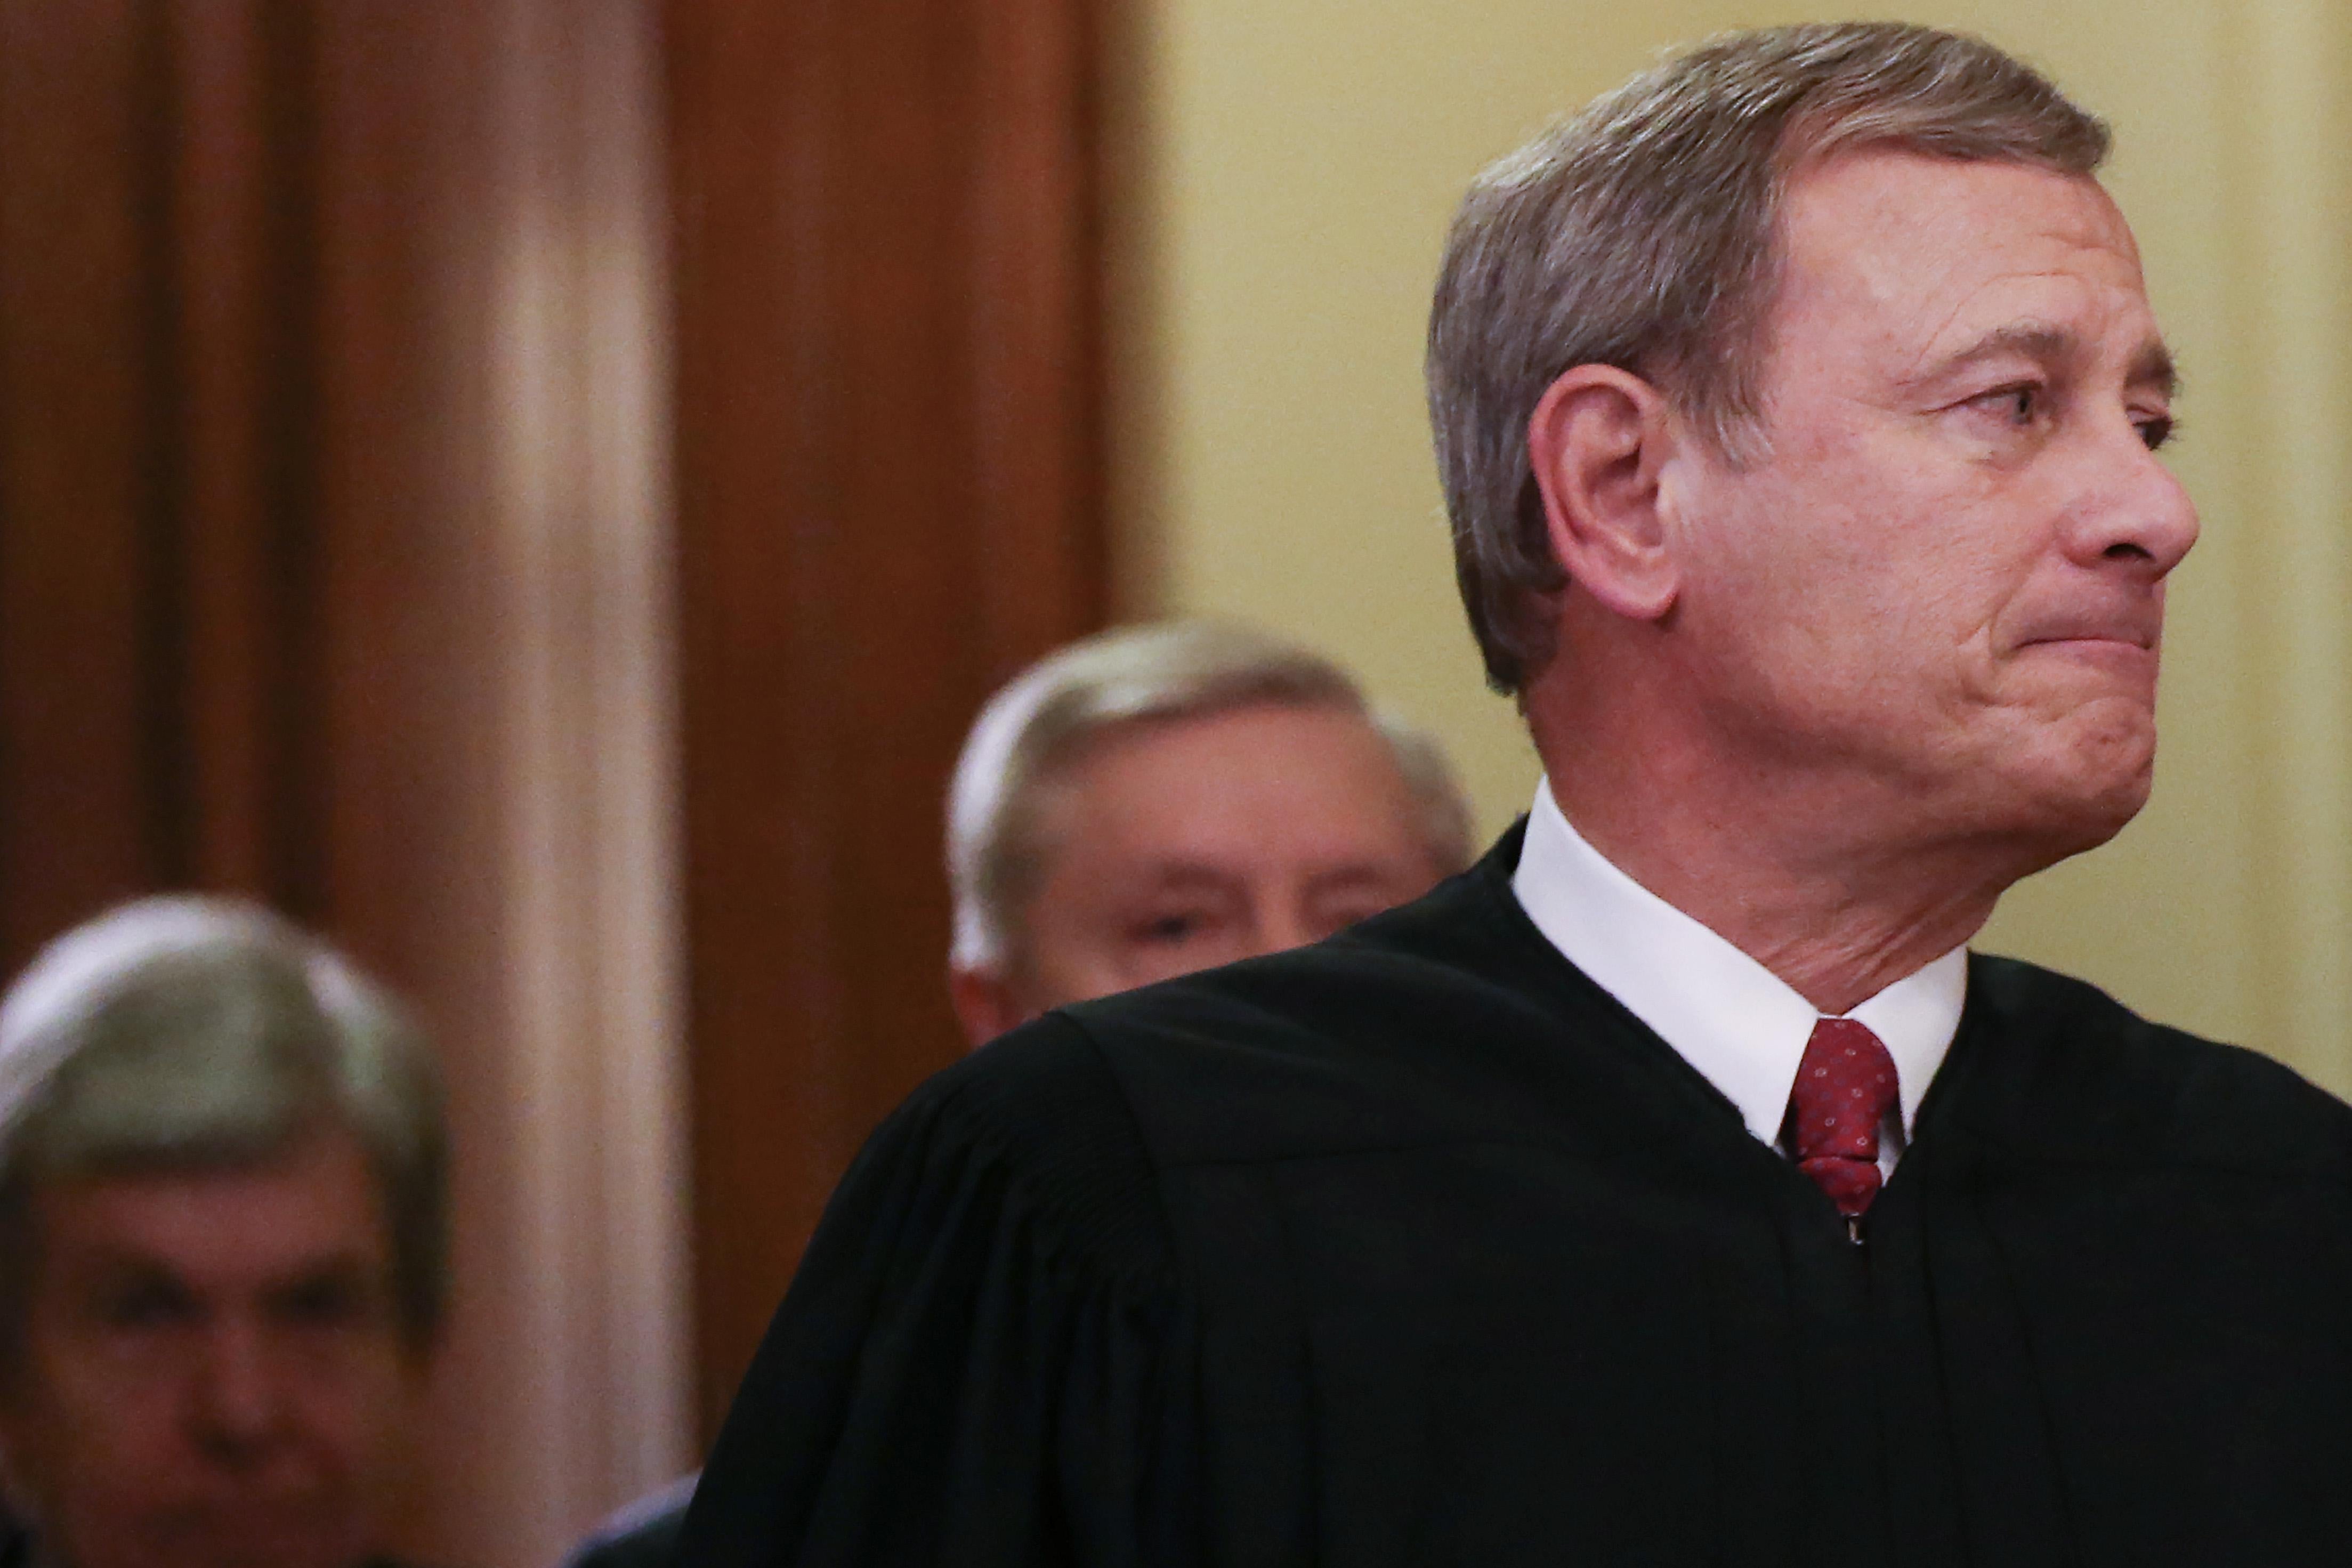 John Roberts, wearing his judicial robes, looks to the right.